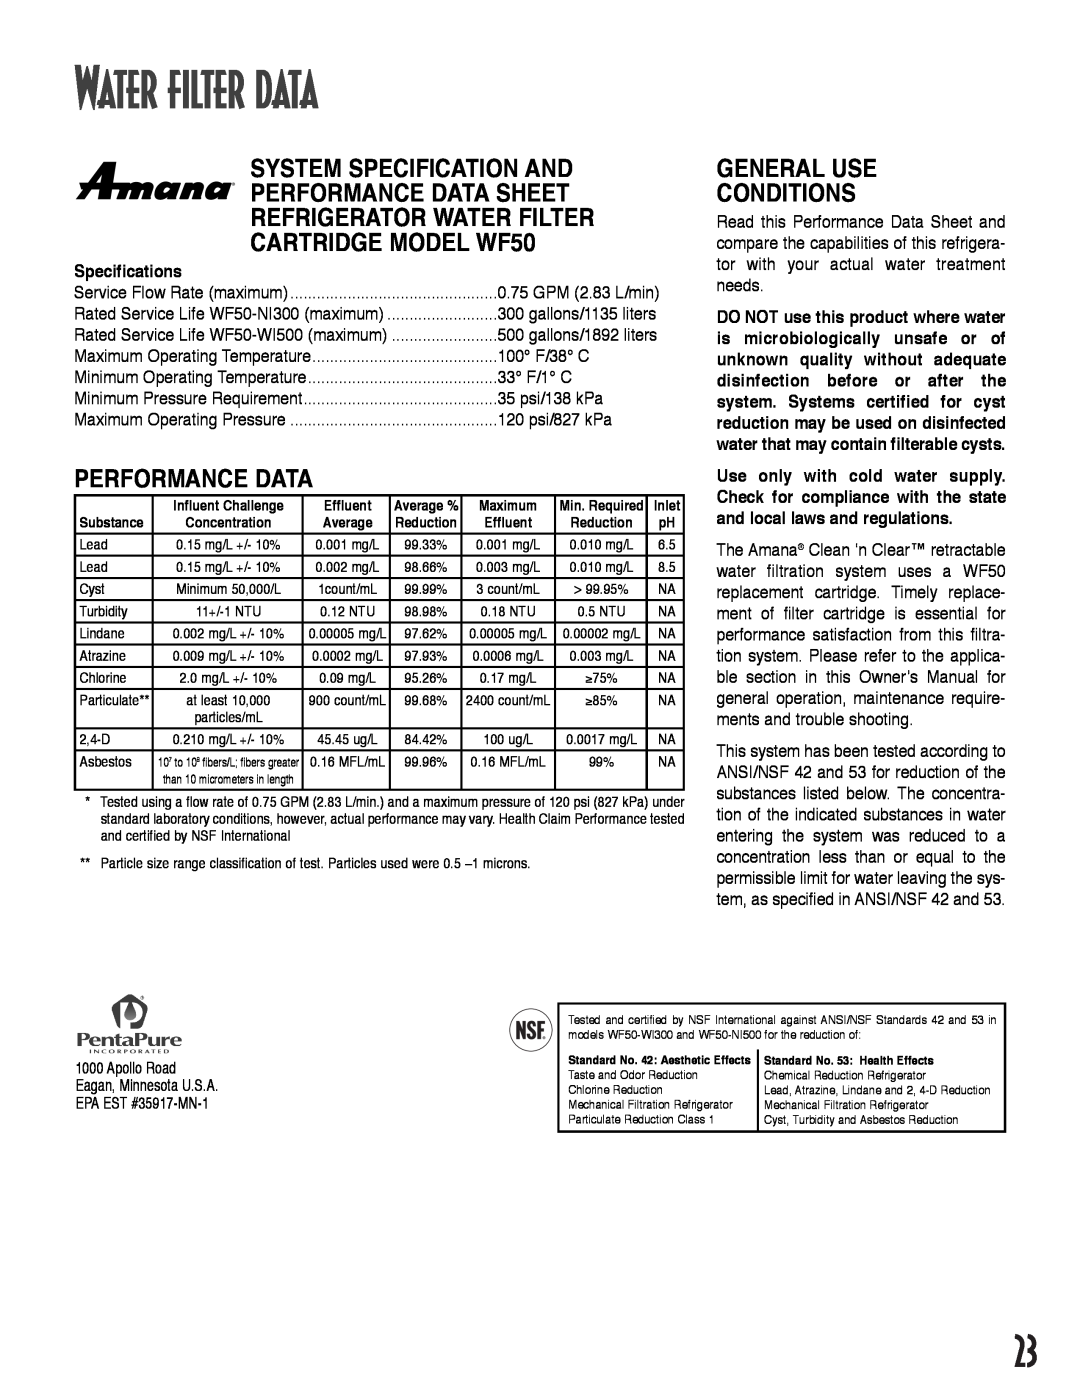 Maytag ARB2257CW, ARB2557CSL Water filter data, System Specification And Performance Data Sheet, General Use Conditions 